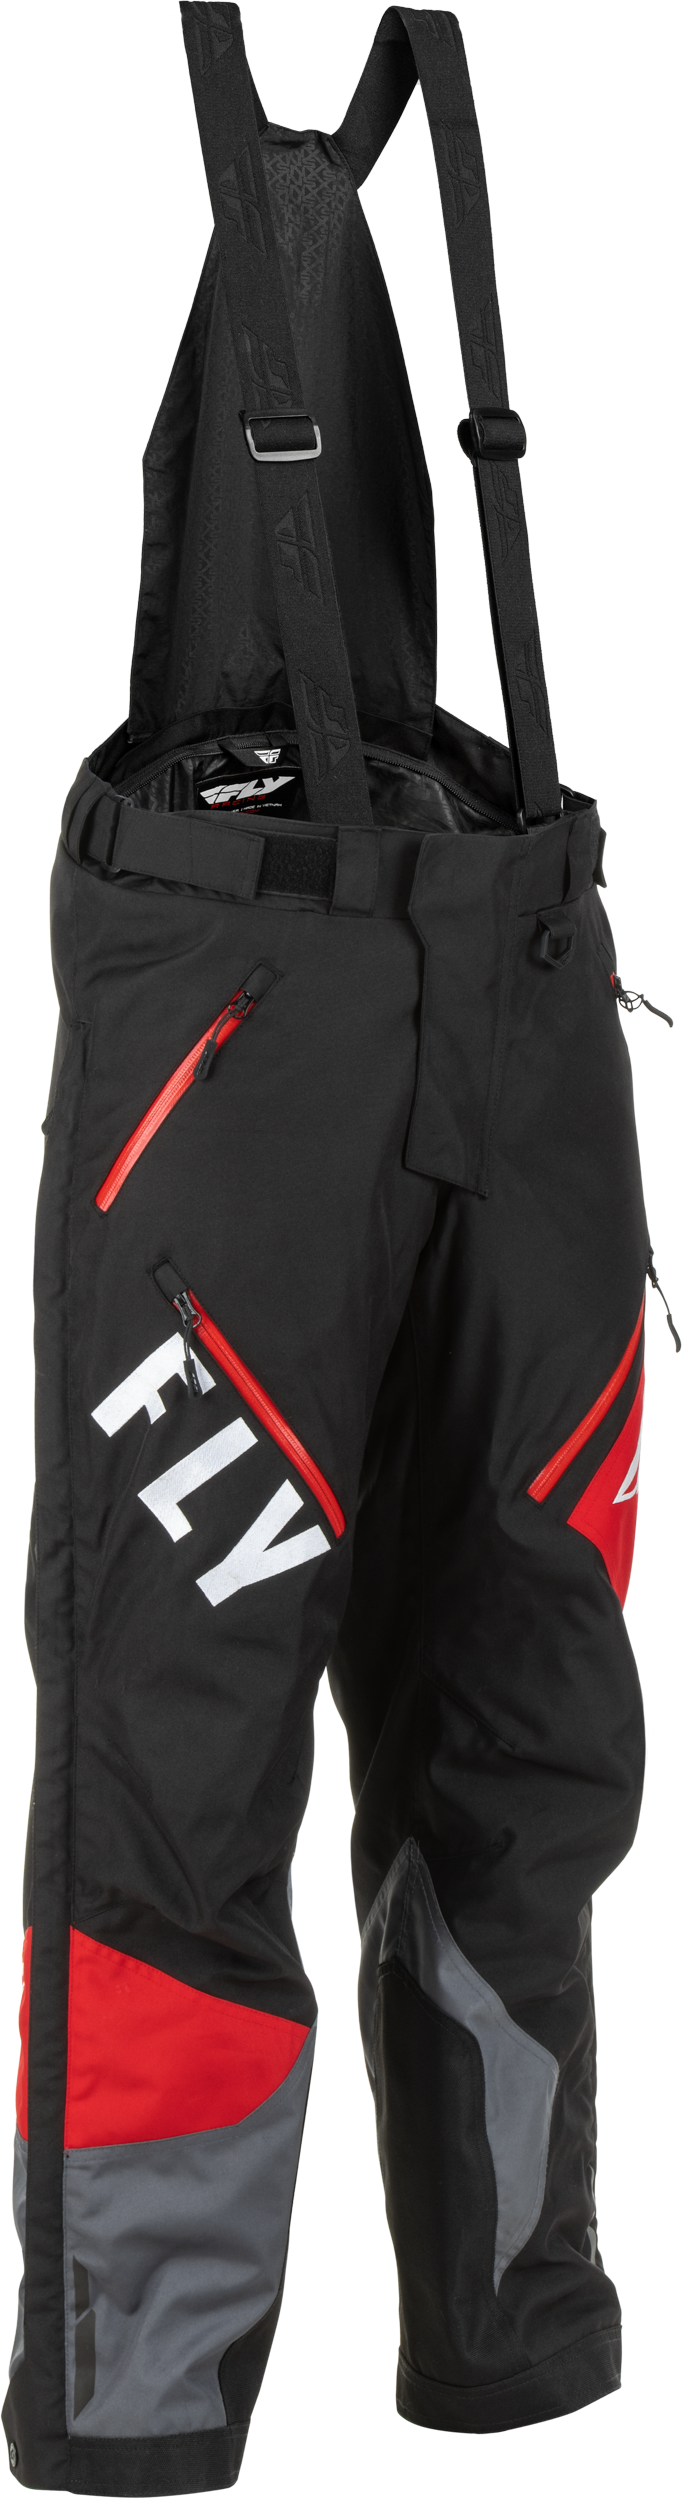 FLY RACING Snx Pro Pants Black/Grey/Red Sm 470-4257S